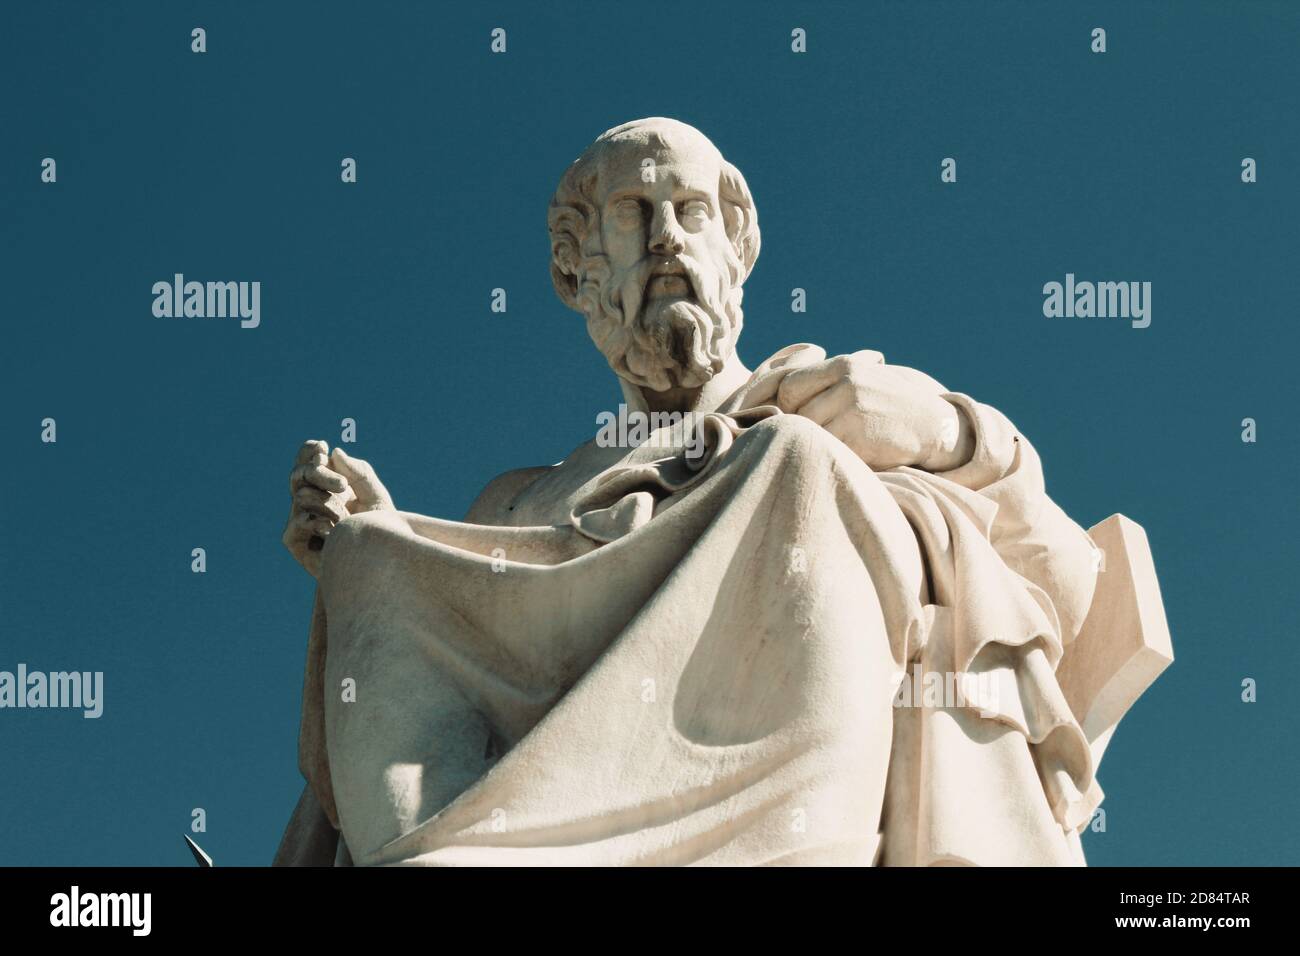 Statue of the ancient Greek philosopher Plato in Athens, Greece. Stock Photo